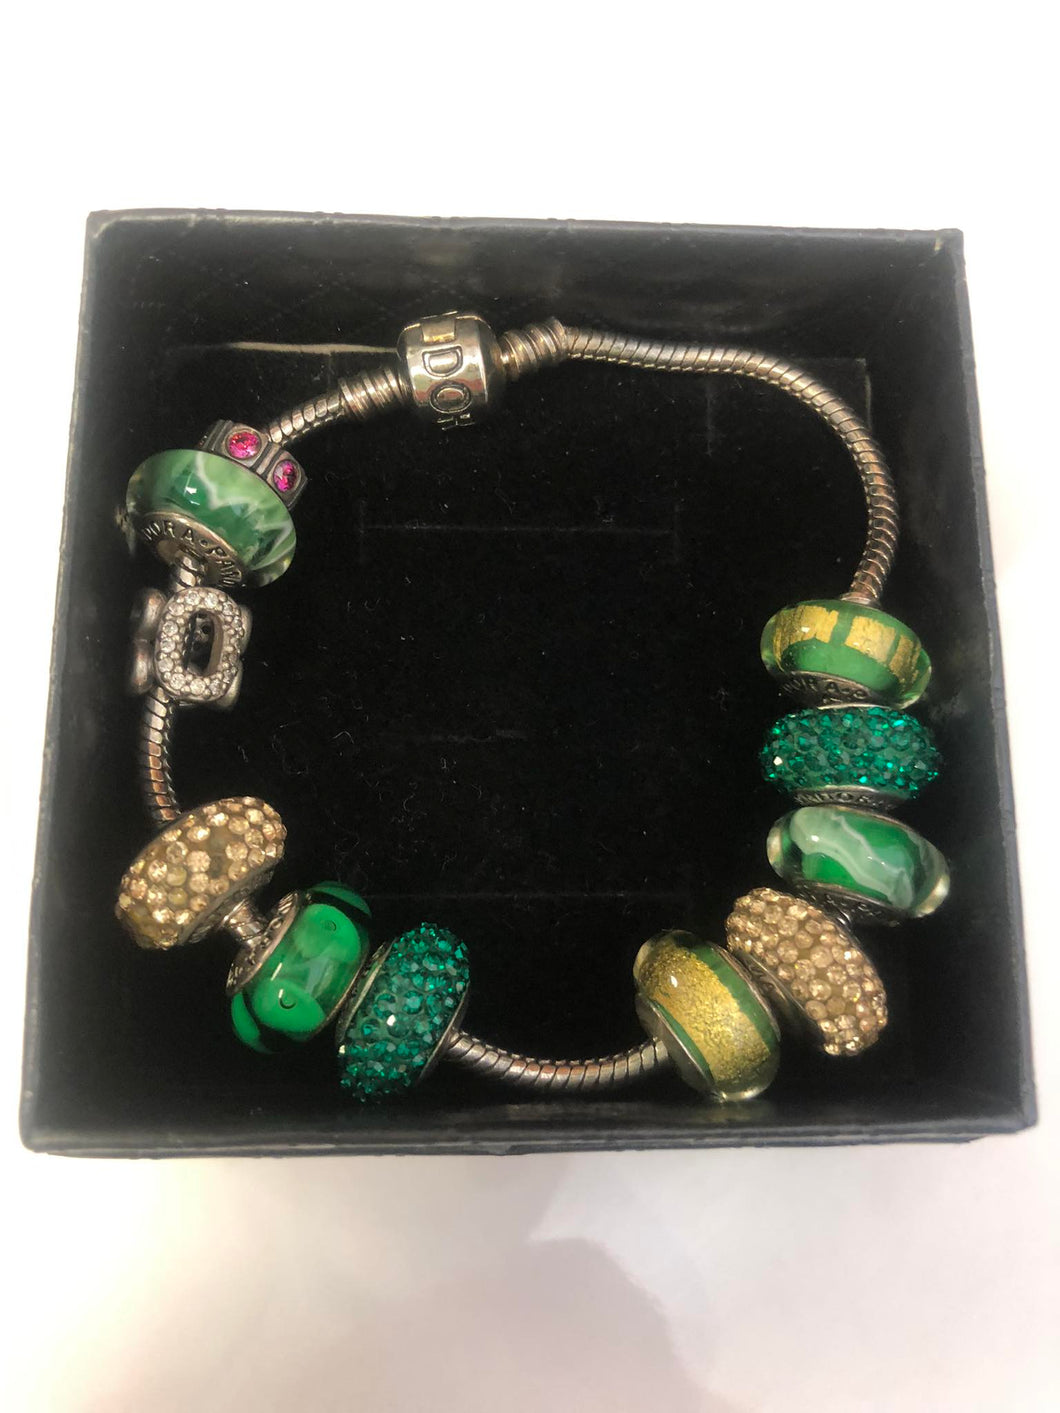 Pandora silver braclet with charms